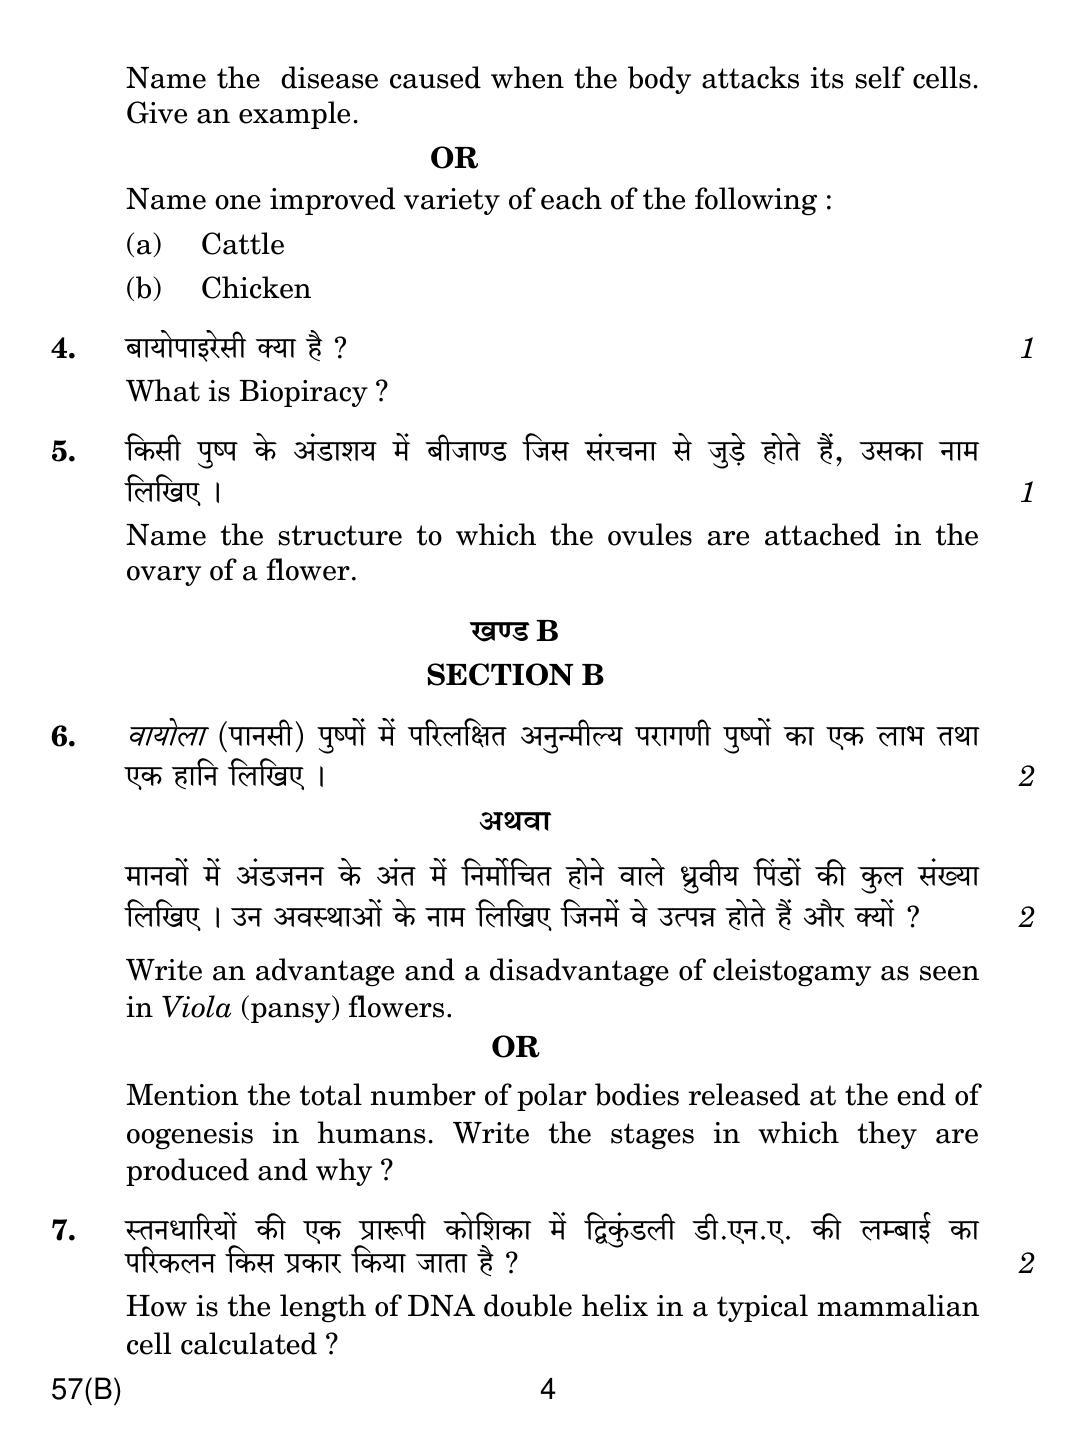 CBSE Class 12 57(B) BIOLOGY 2019 Compartment Question Paper - Page 4